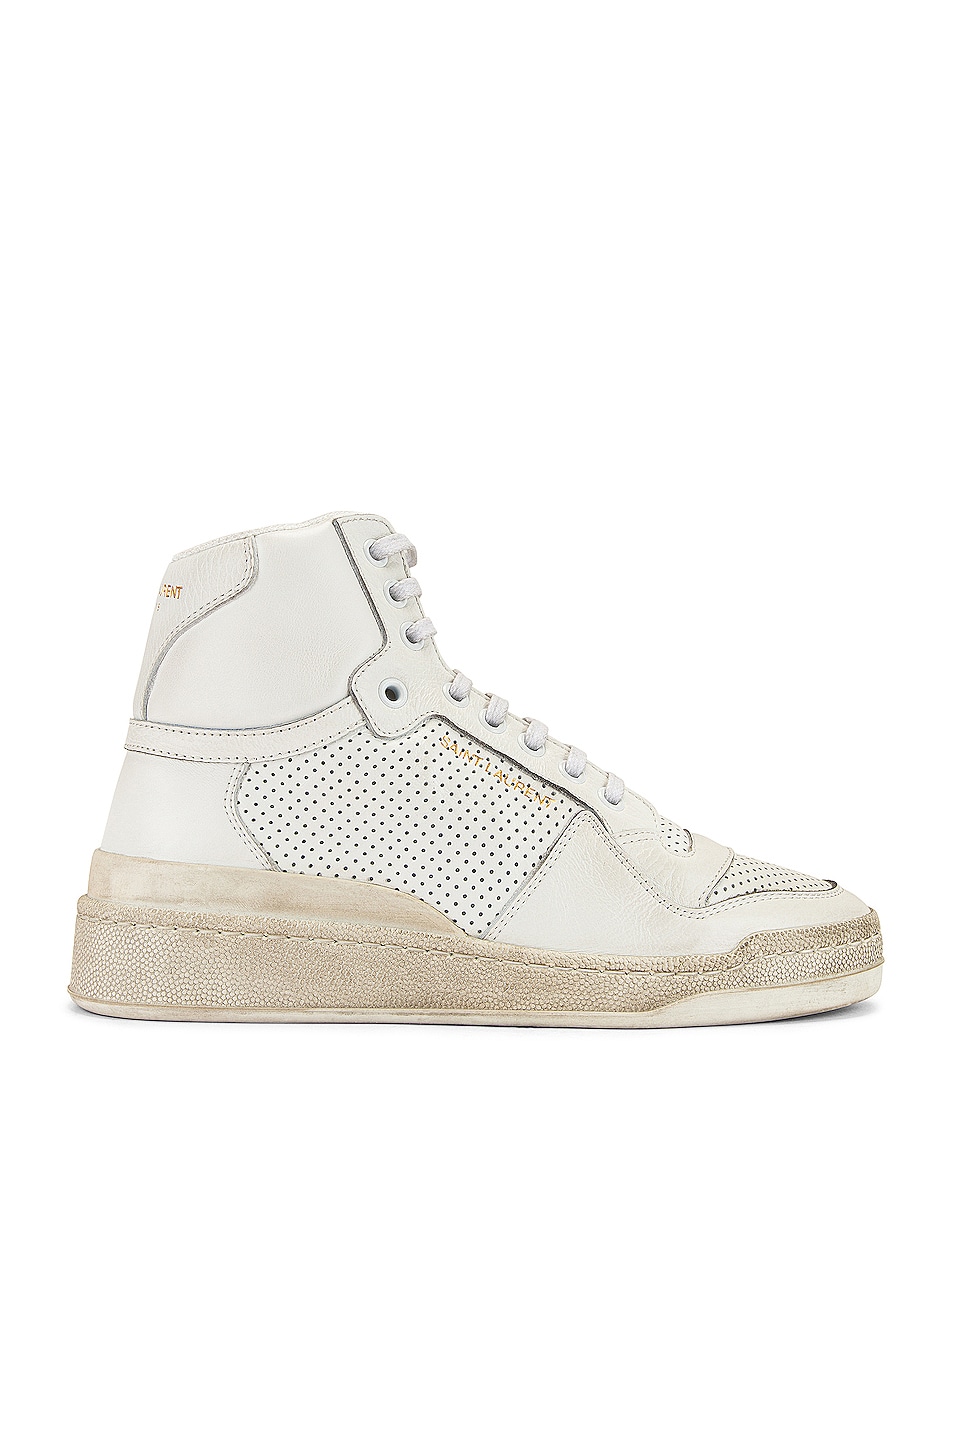 Image 1 of Saint Laurent High Top Sneakers in White